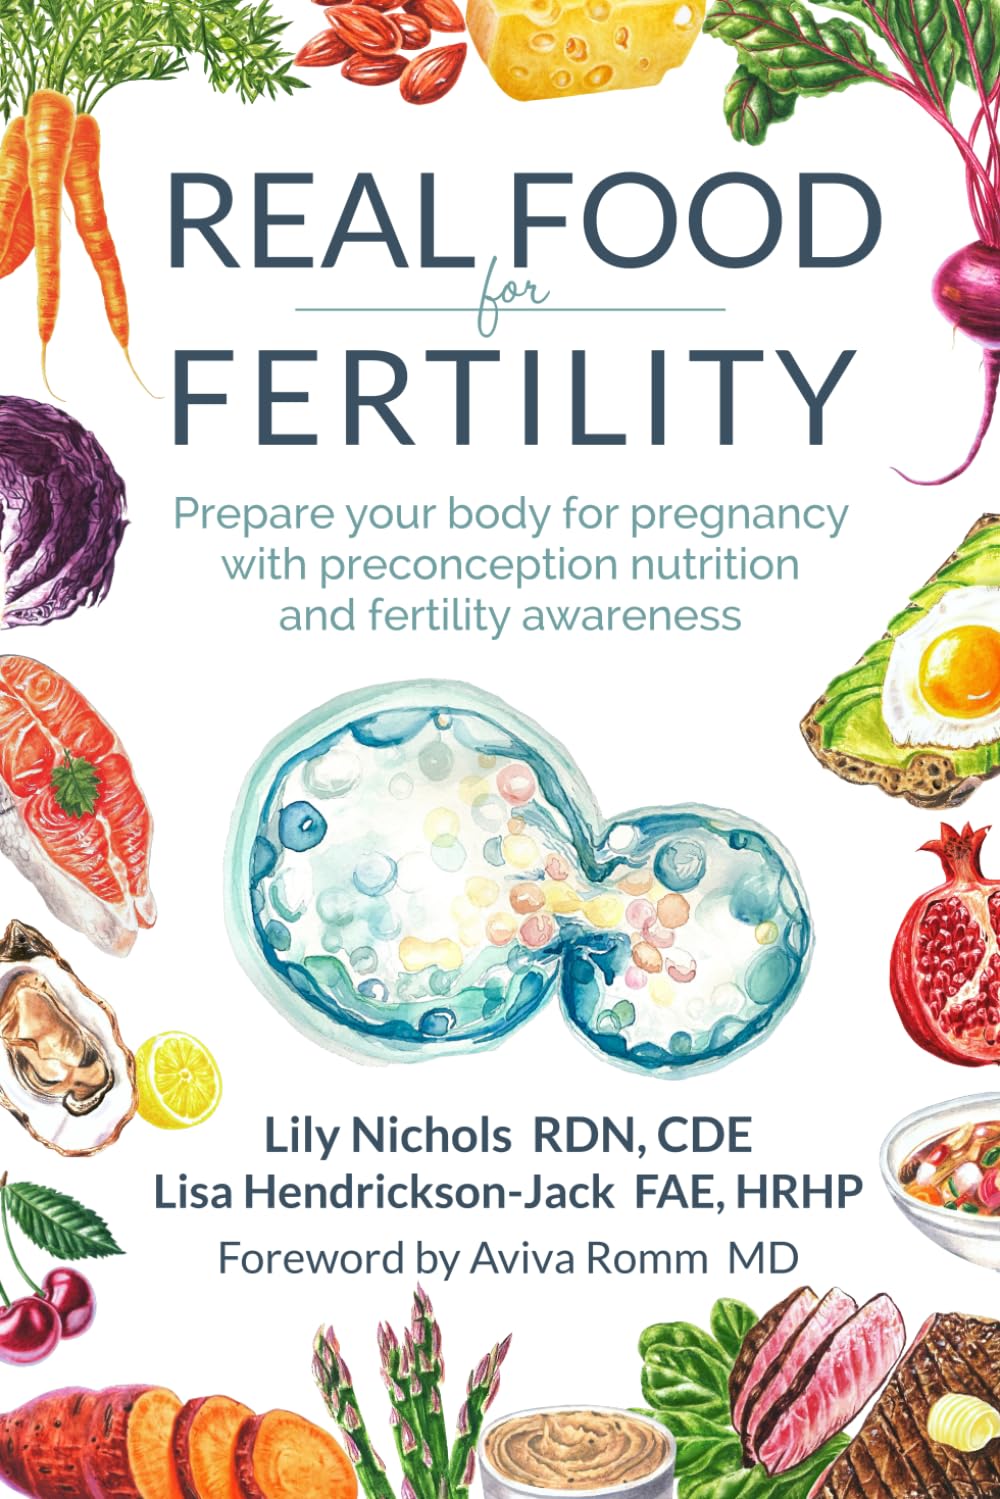 Real Food for Fertility: Prepare your body for pregnancy with preconception nutrition and fertility awareness